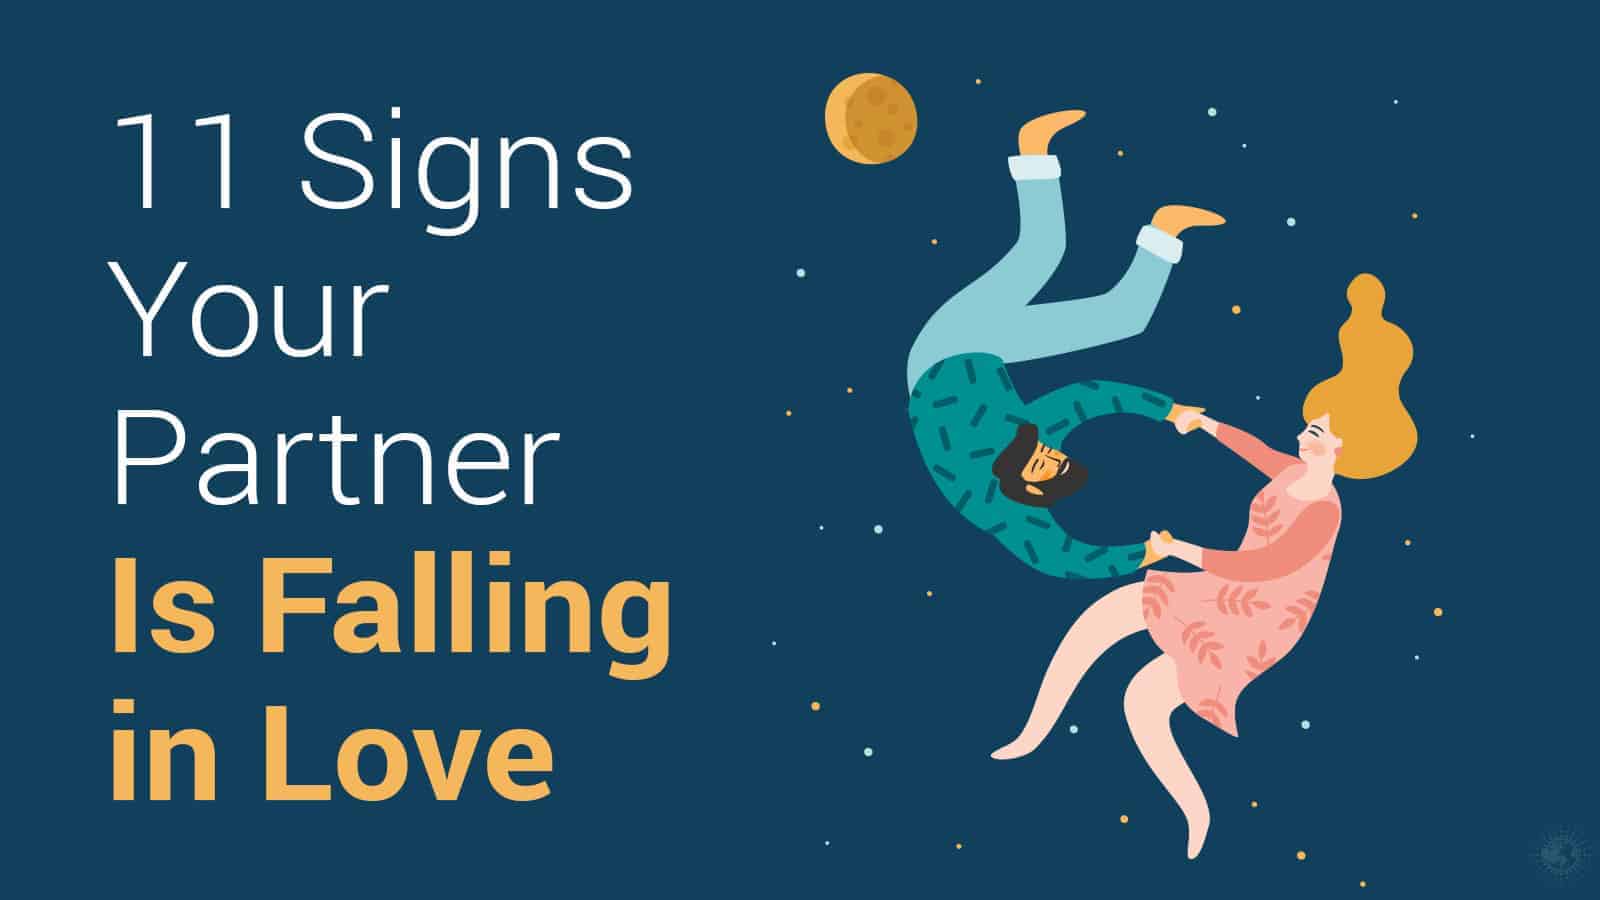 11 Signs Your Partner Is Falling in Love